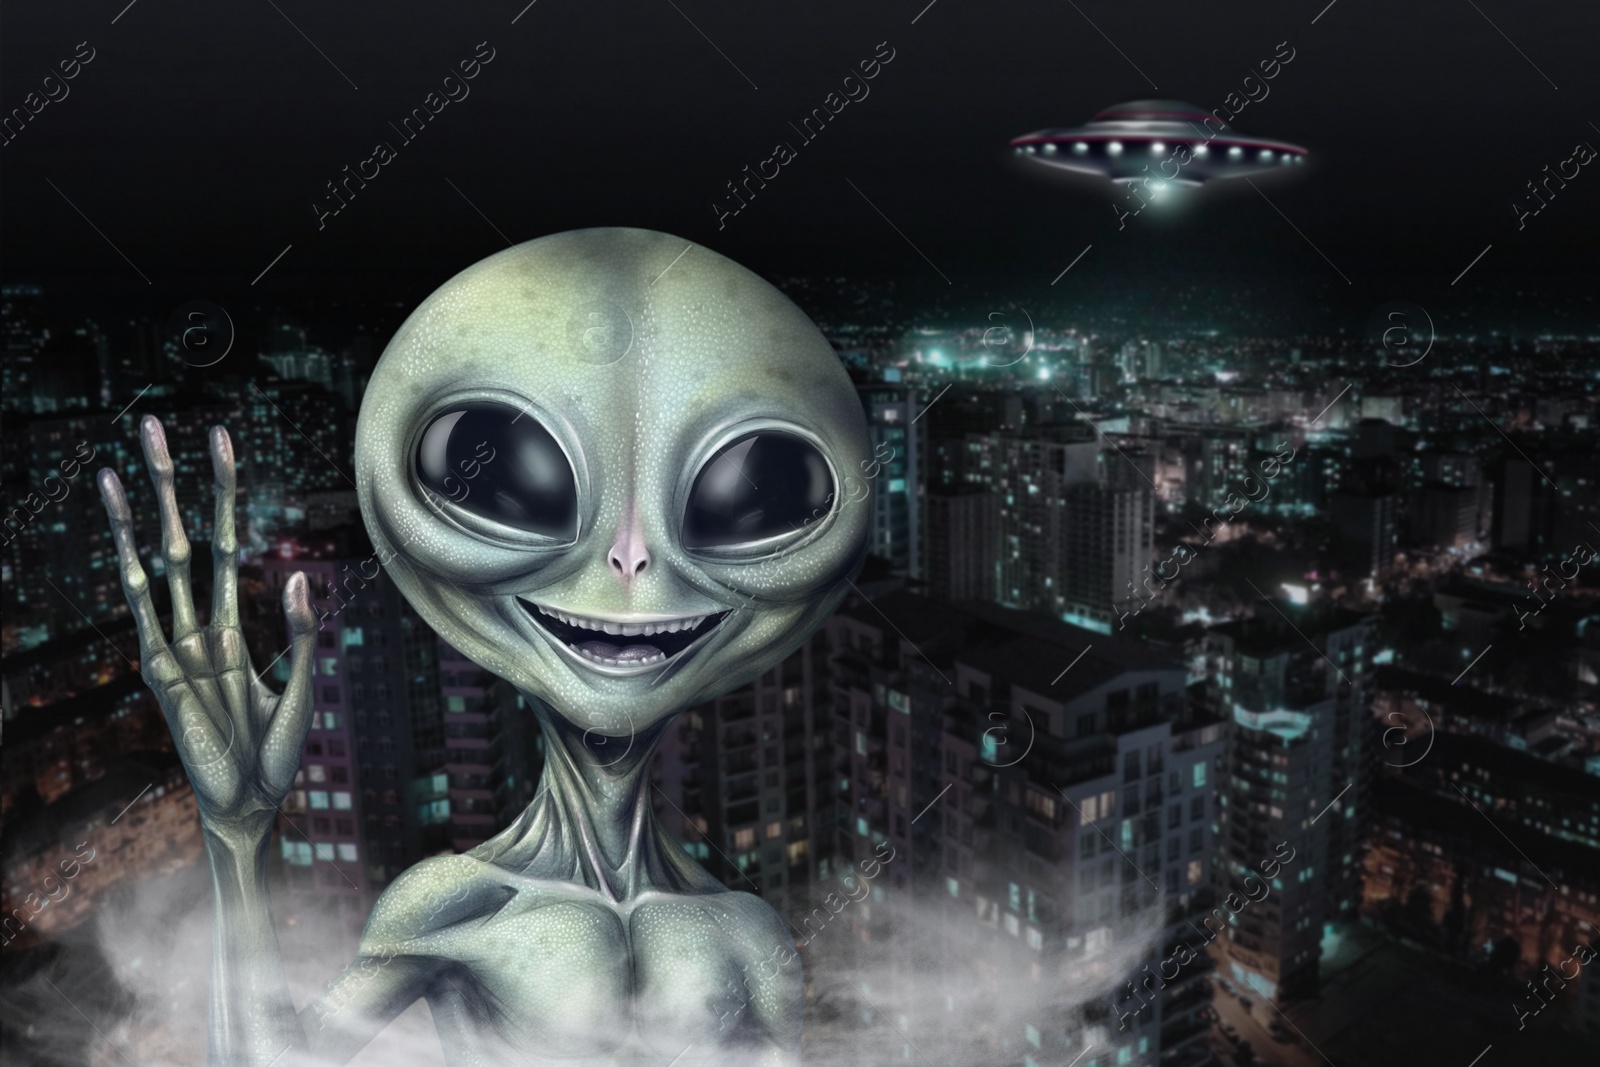 Image of Alien and flying saucer at city. UFO, extraterrestrial visitors